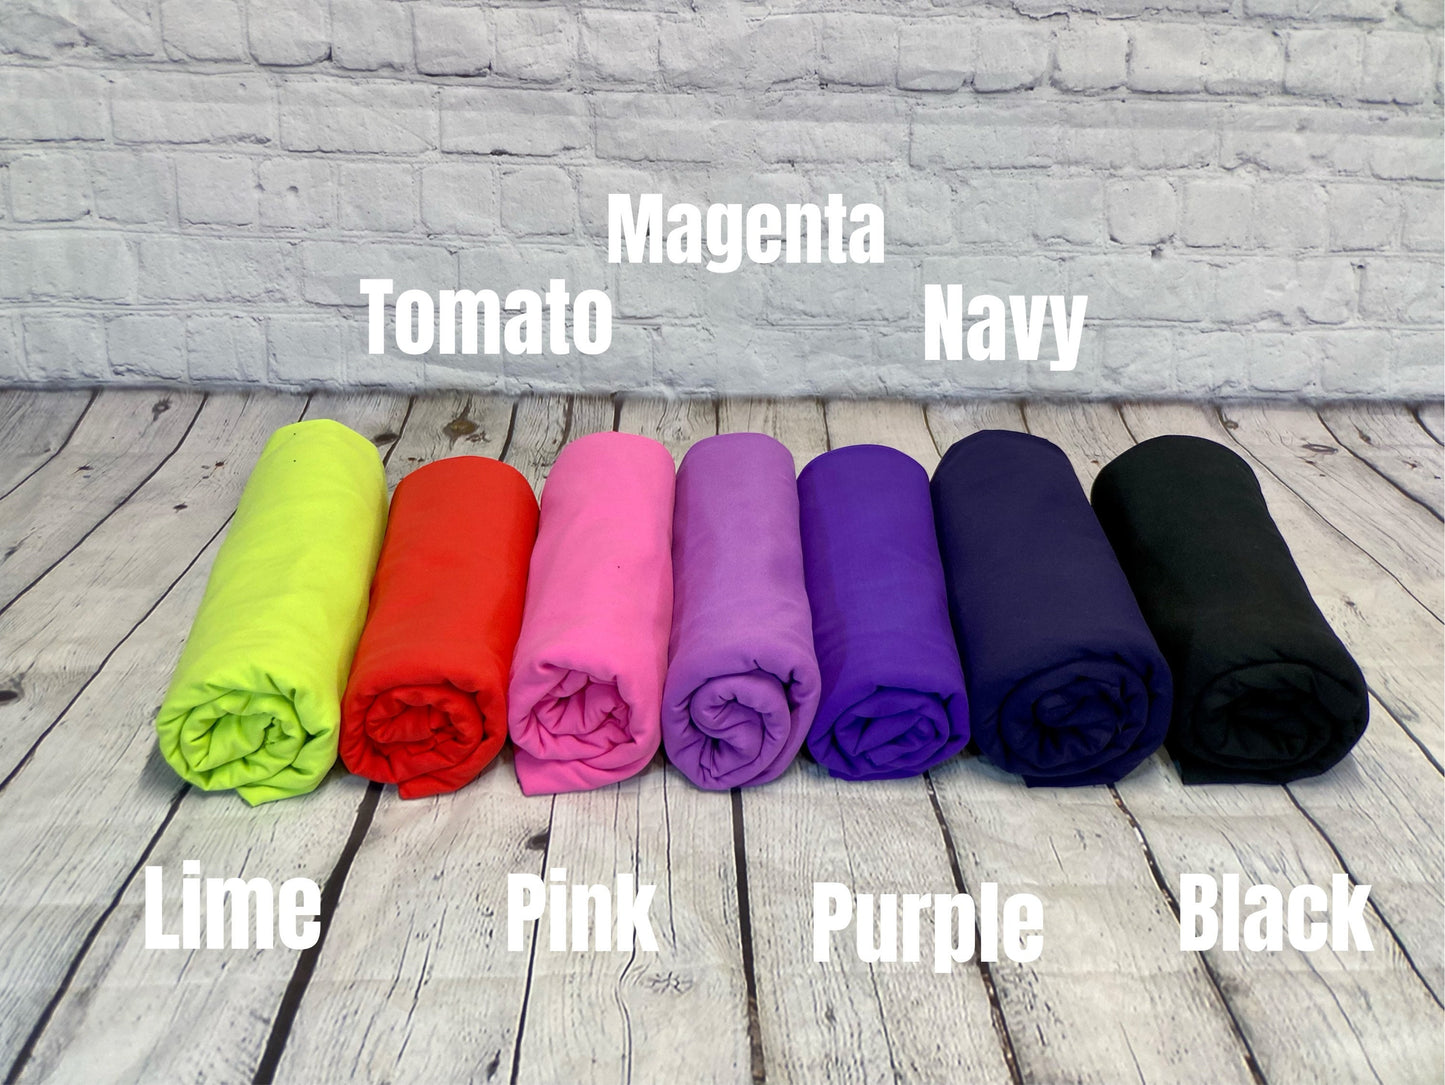 4-Way Stretch Heavy Weight Tactel for Leggings, Work Out Gear, Or Masks! 380GSM Fabric By The Yard